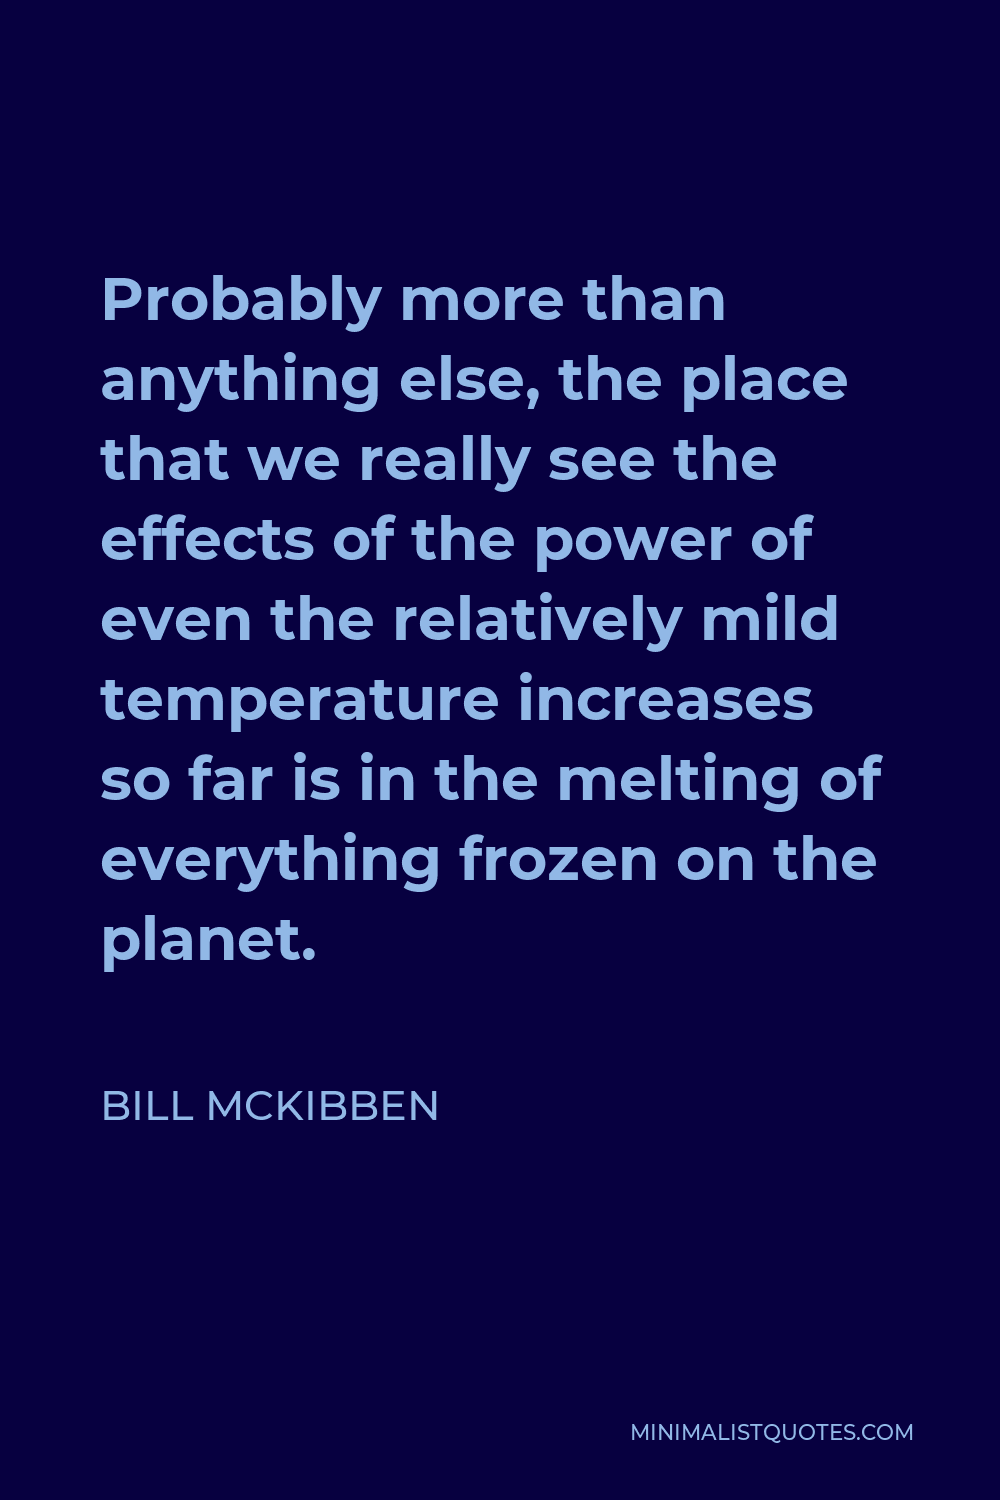 Bill McKibben Quote - Probably more than anything else, the place that we really see the effects of the power of even the relatively mild temperature increases so far is in the melting of everything frozen on the planet.